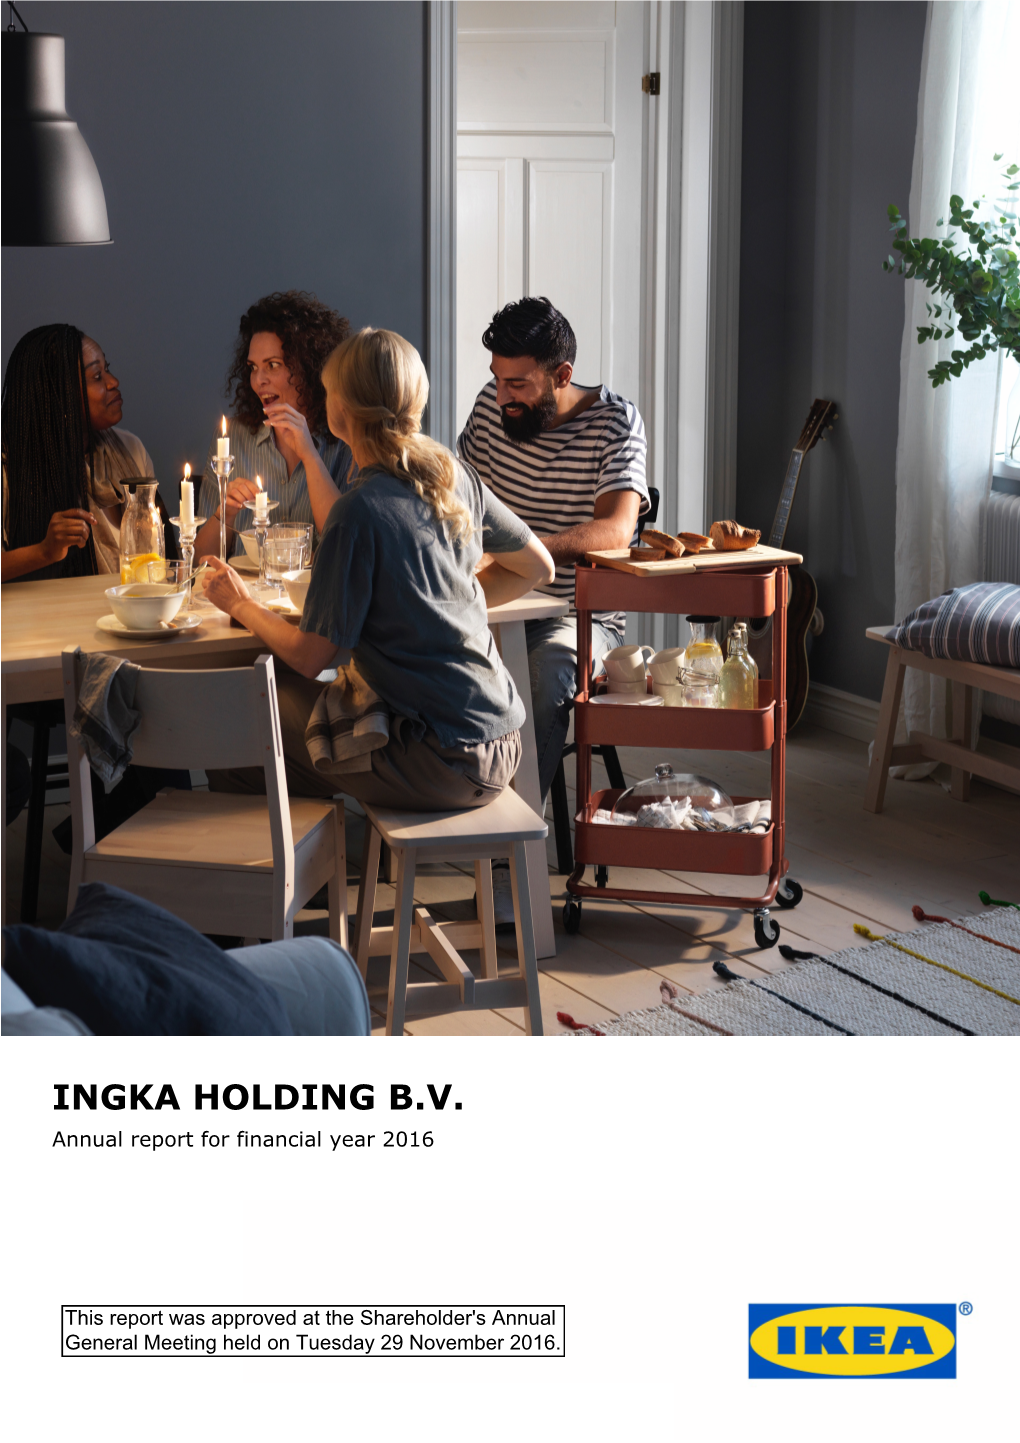 INGKA HOLDING B.V. Annual Report for Financial Year 2016